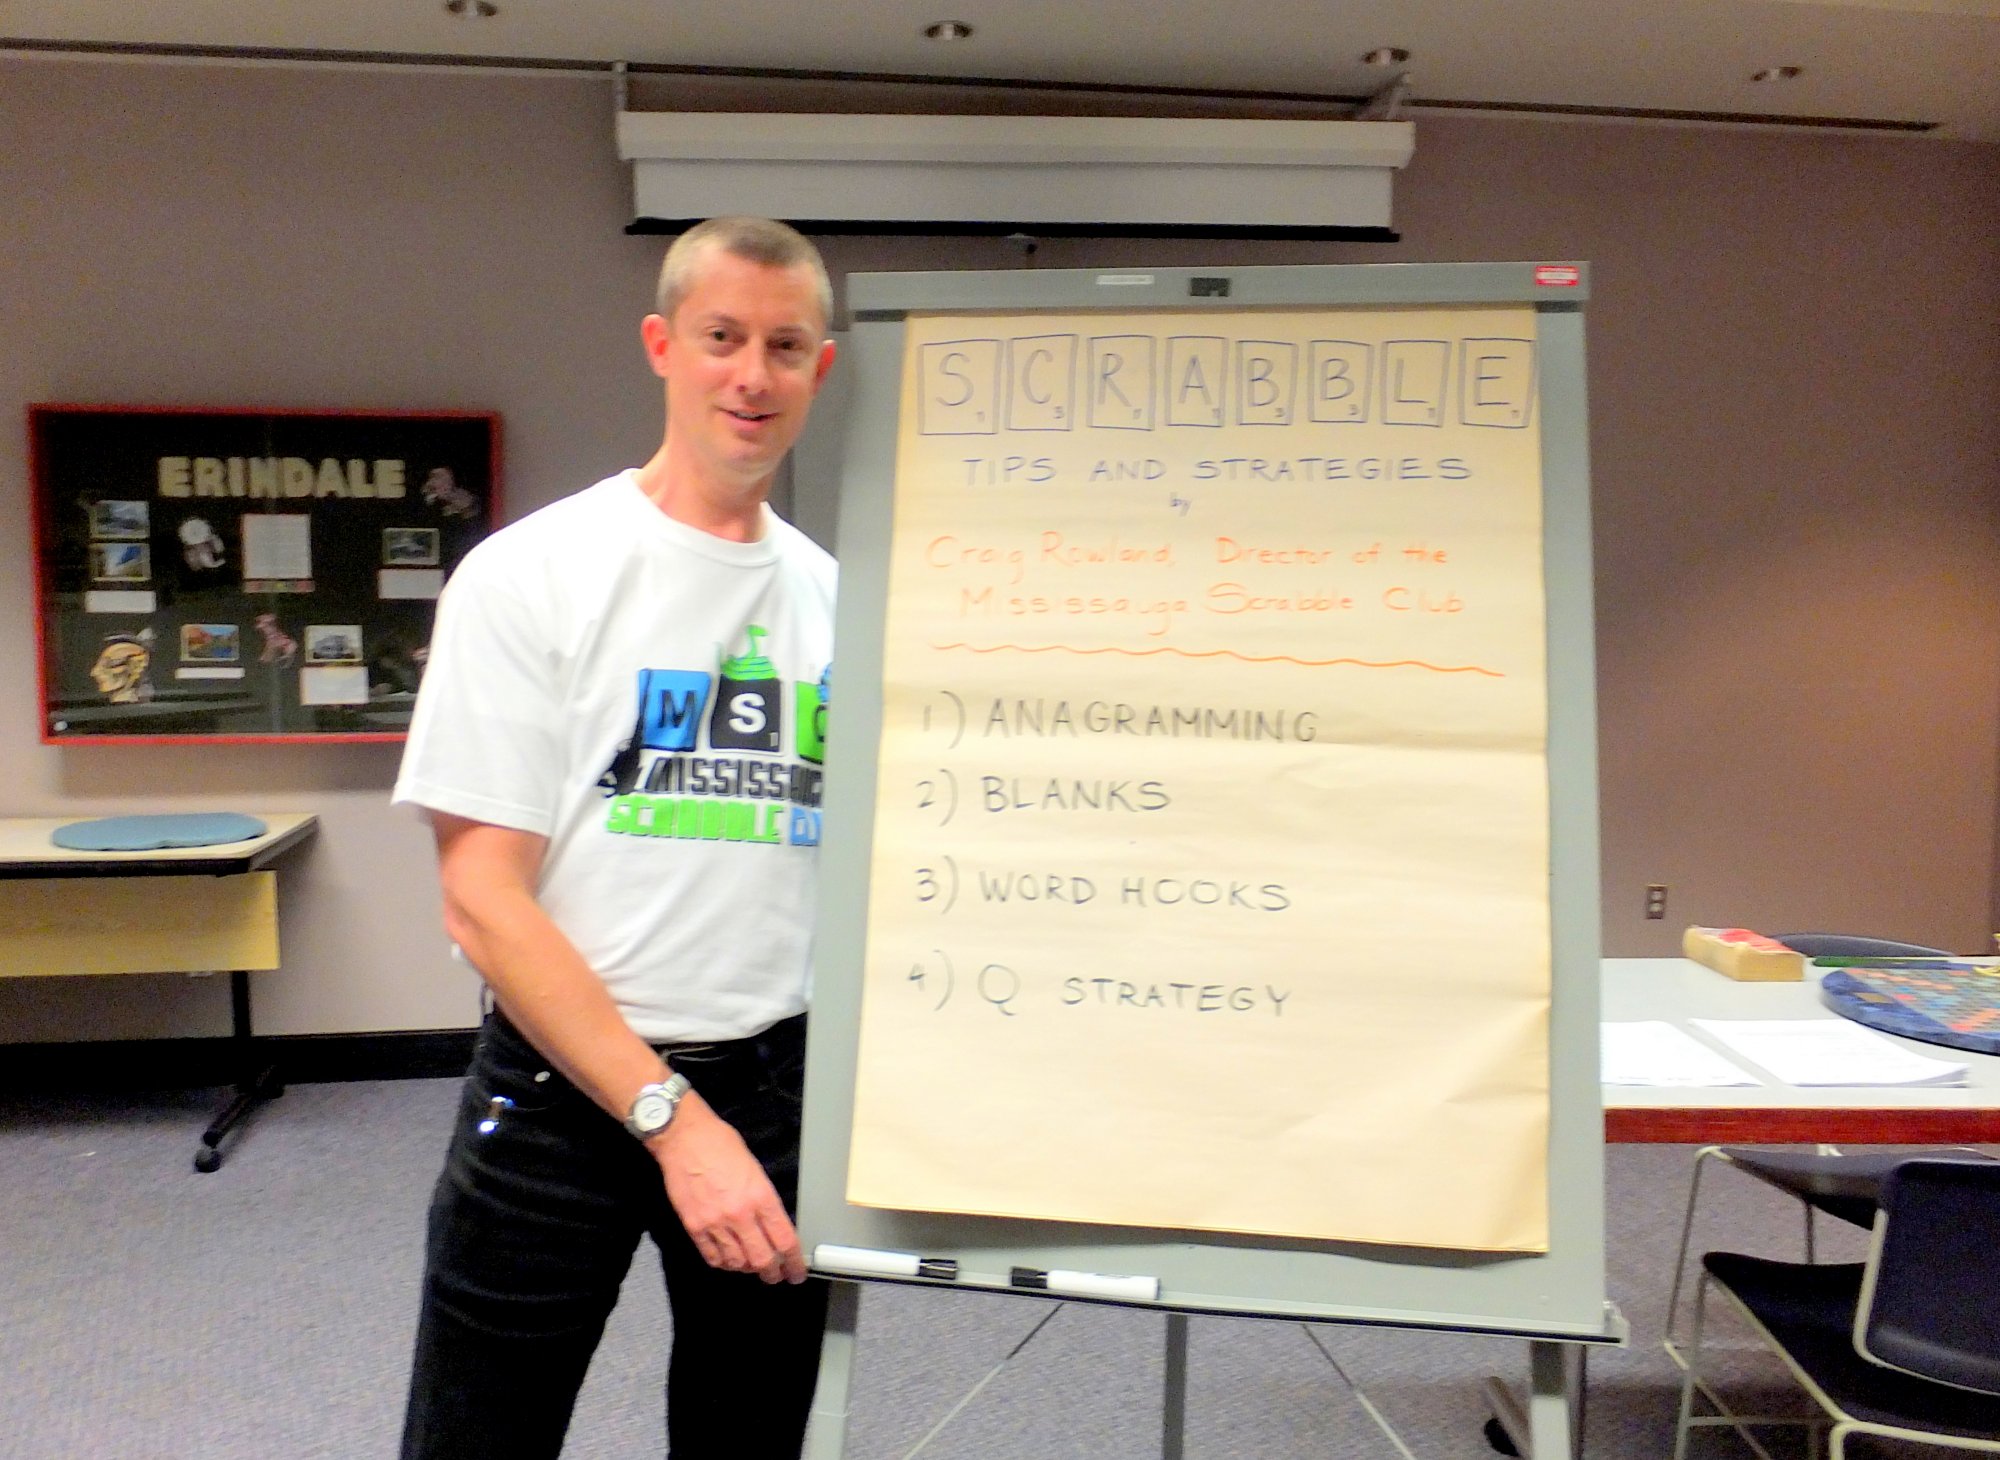 Craig Rowland presents Improve Your Scrabble Game at Mississauga Central Library, 21 Oct. 2014. Photo by I Lee.